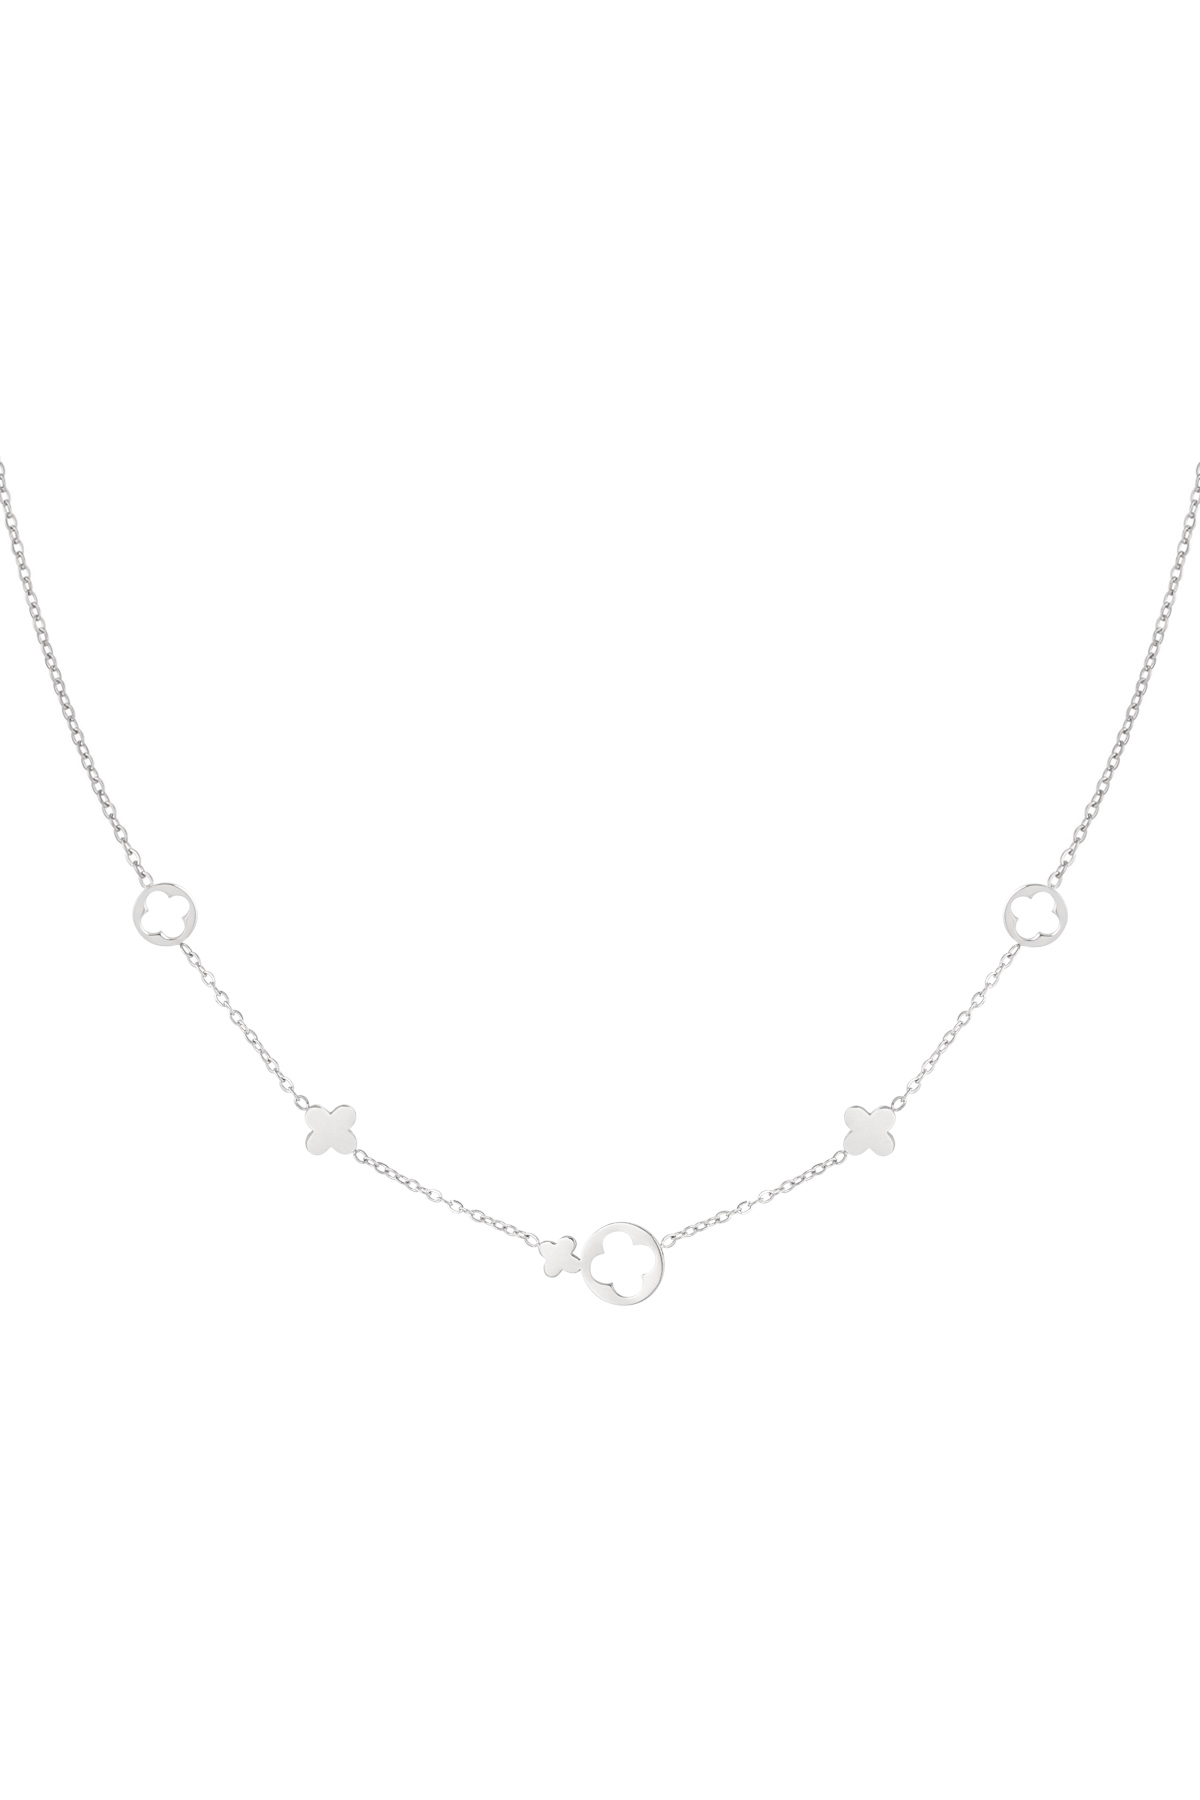 Necklace clover charms - silver h5 